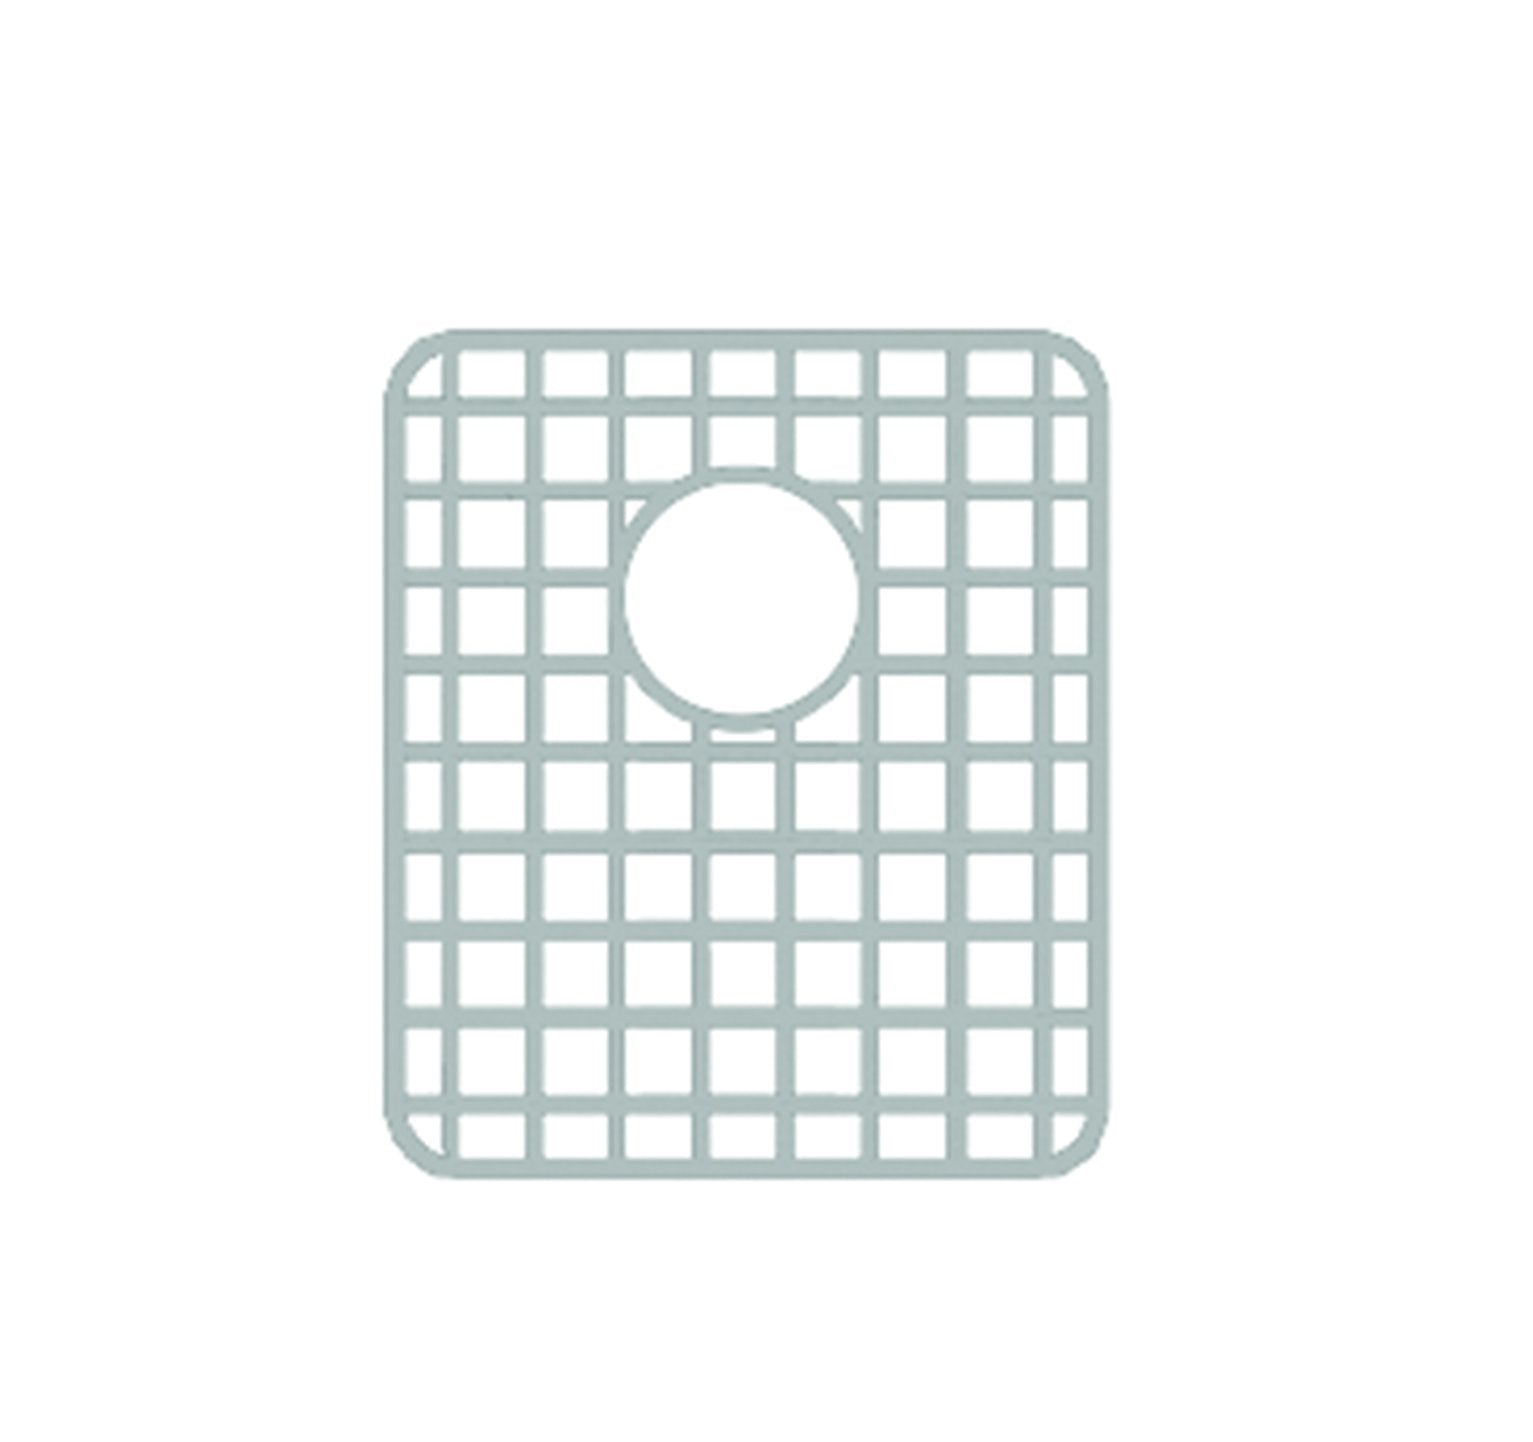 Stainless Steel Kitchen Sink Grid For Noah's Sink Model WHNC3721